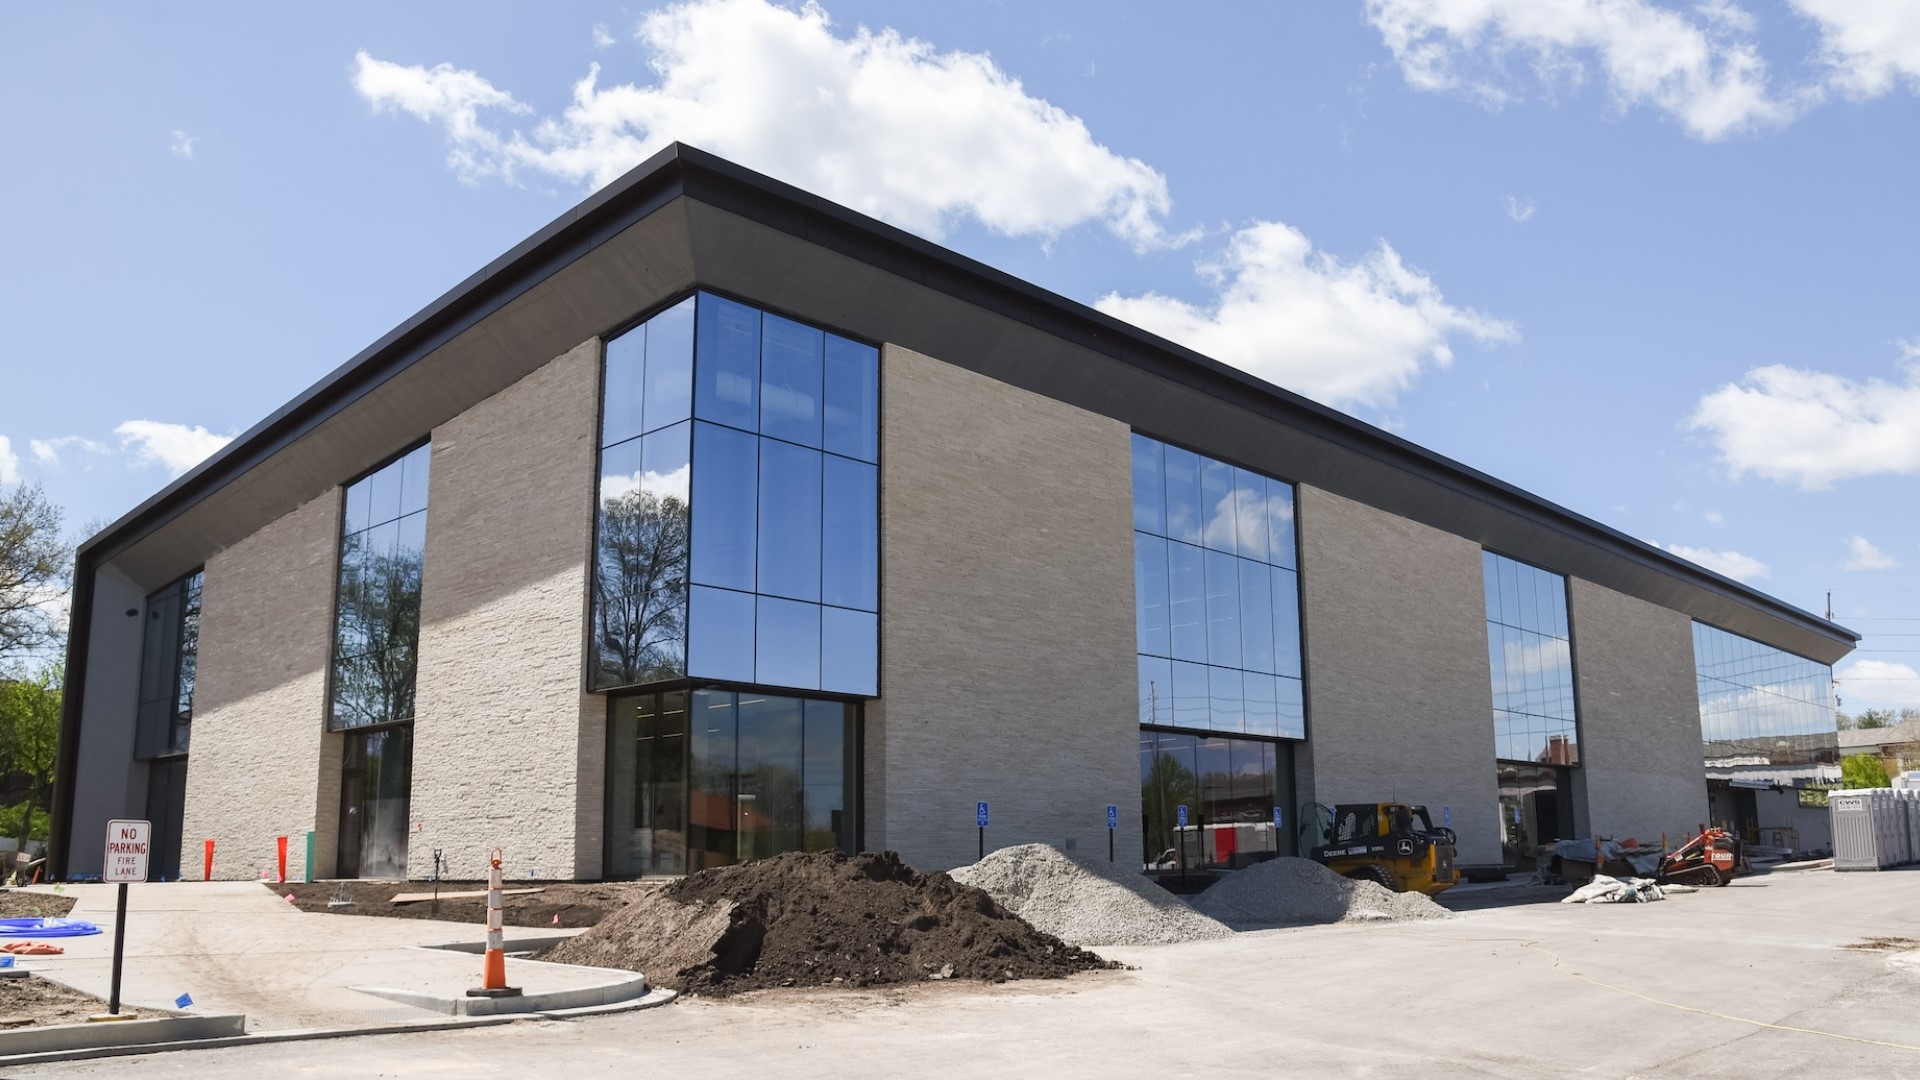 St. Louis County Library patrons will finally be able to visit the new Clark Family Branch this summer after construction forced the library's headquarters to close.